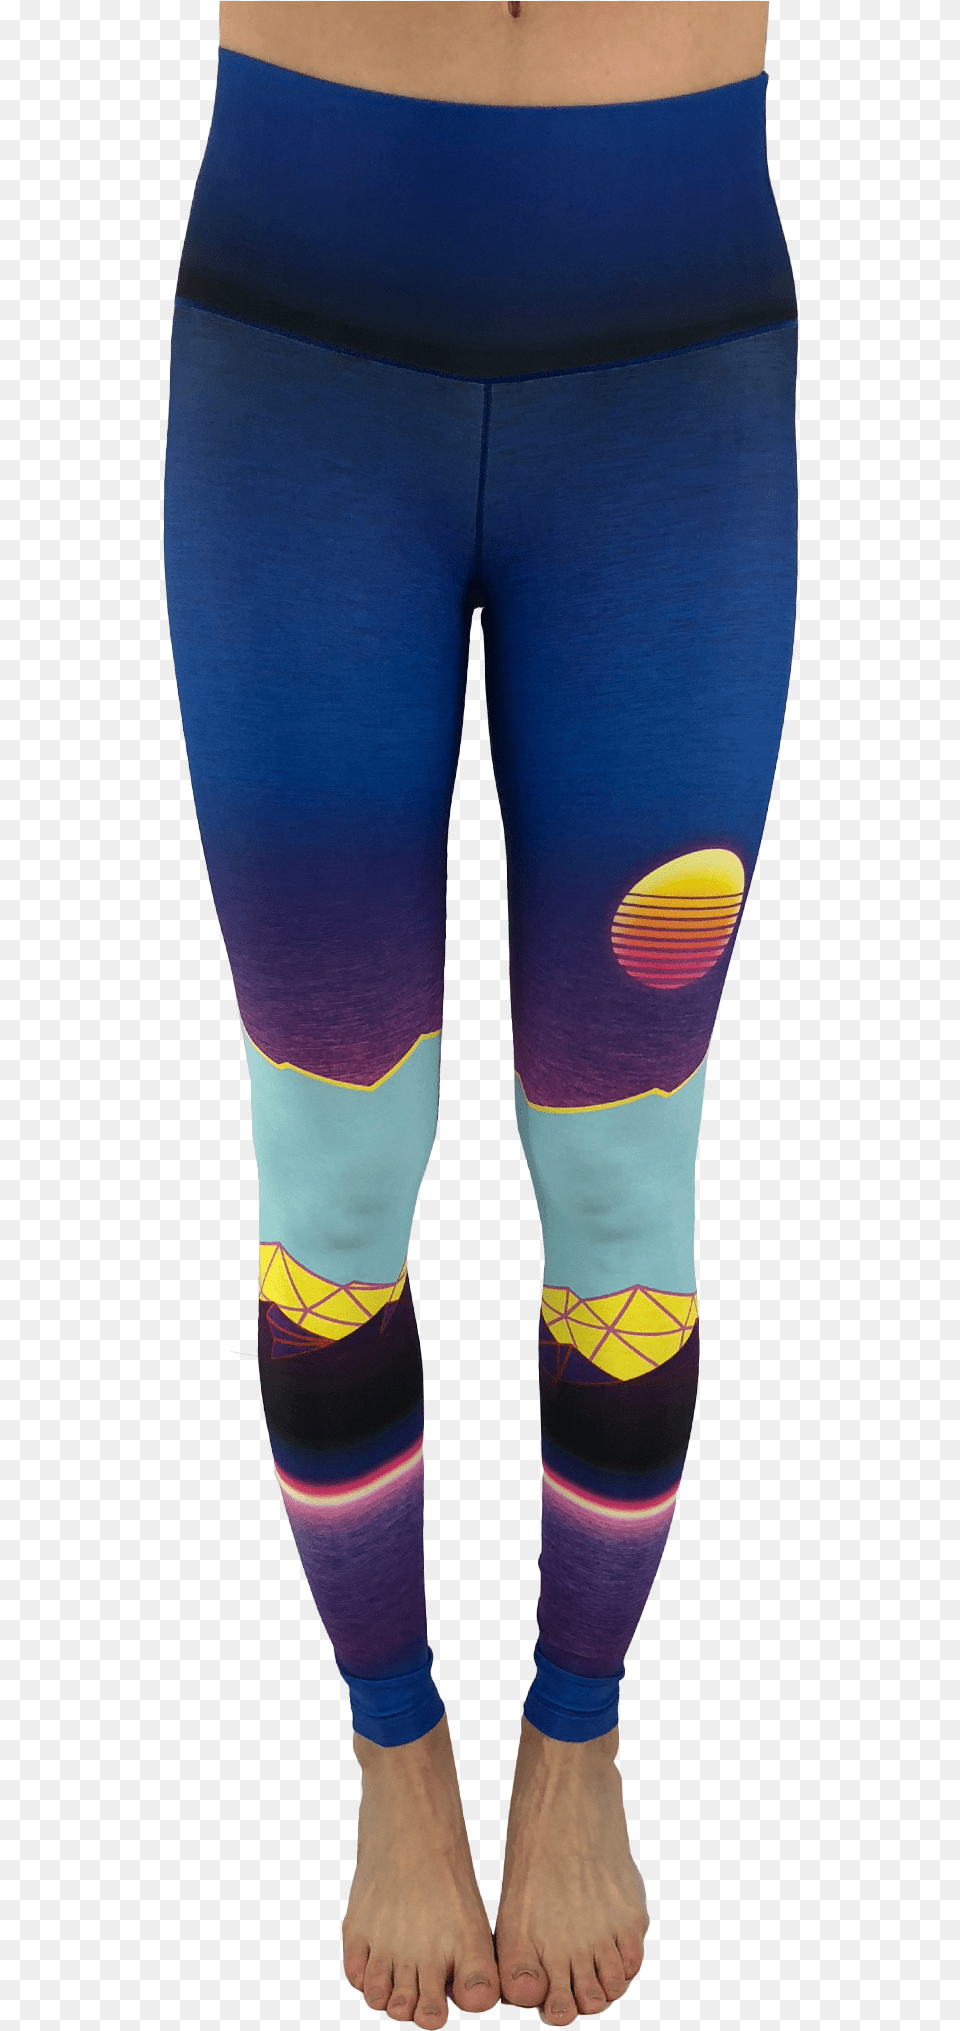 Sand Dunes Colorado Yoga Pants, Clothing, Hosiery, Tights, Adult Png